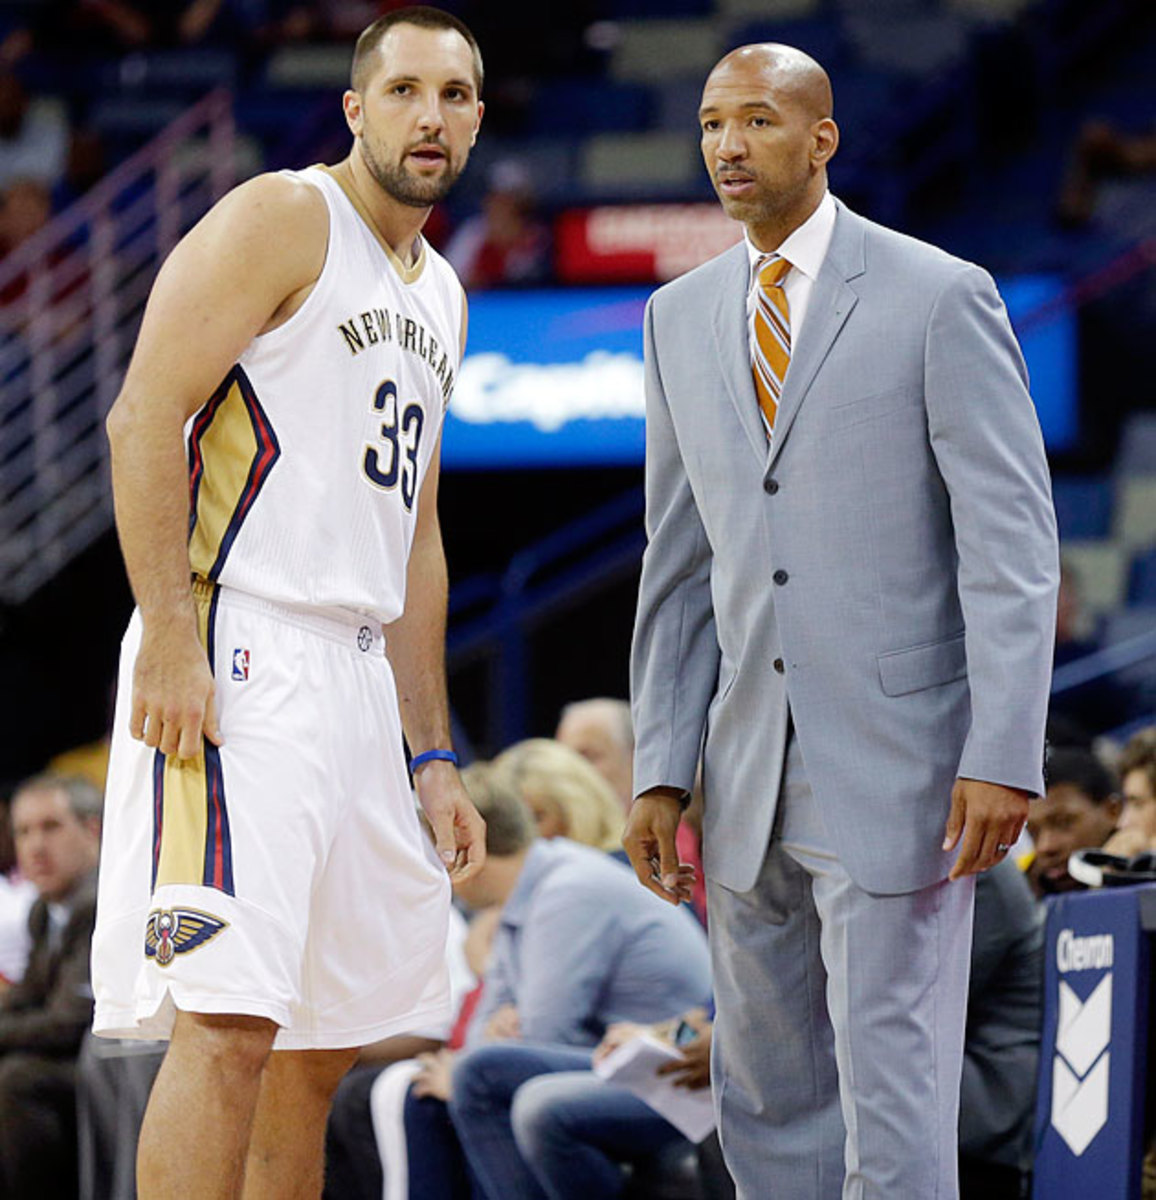 The Pelicans' Monty Williams (right) was as much a counselor as a coach to Anderson in the aftermath of Gia Allemand's suicide.